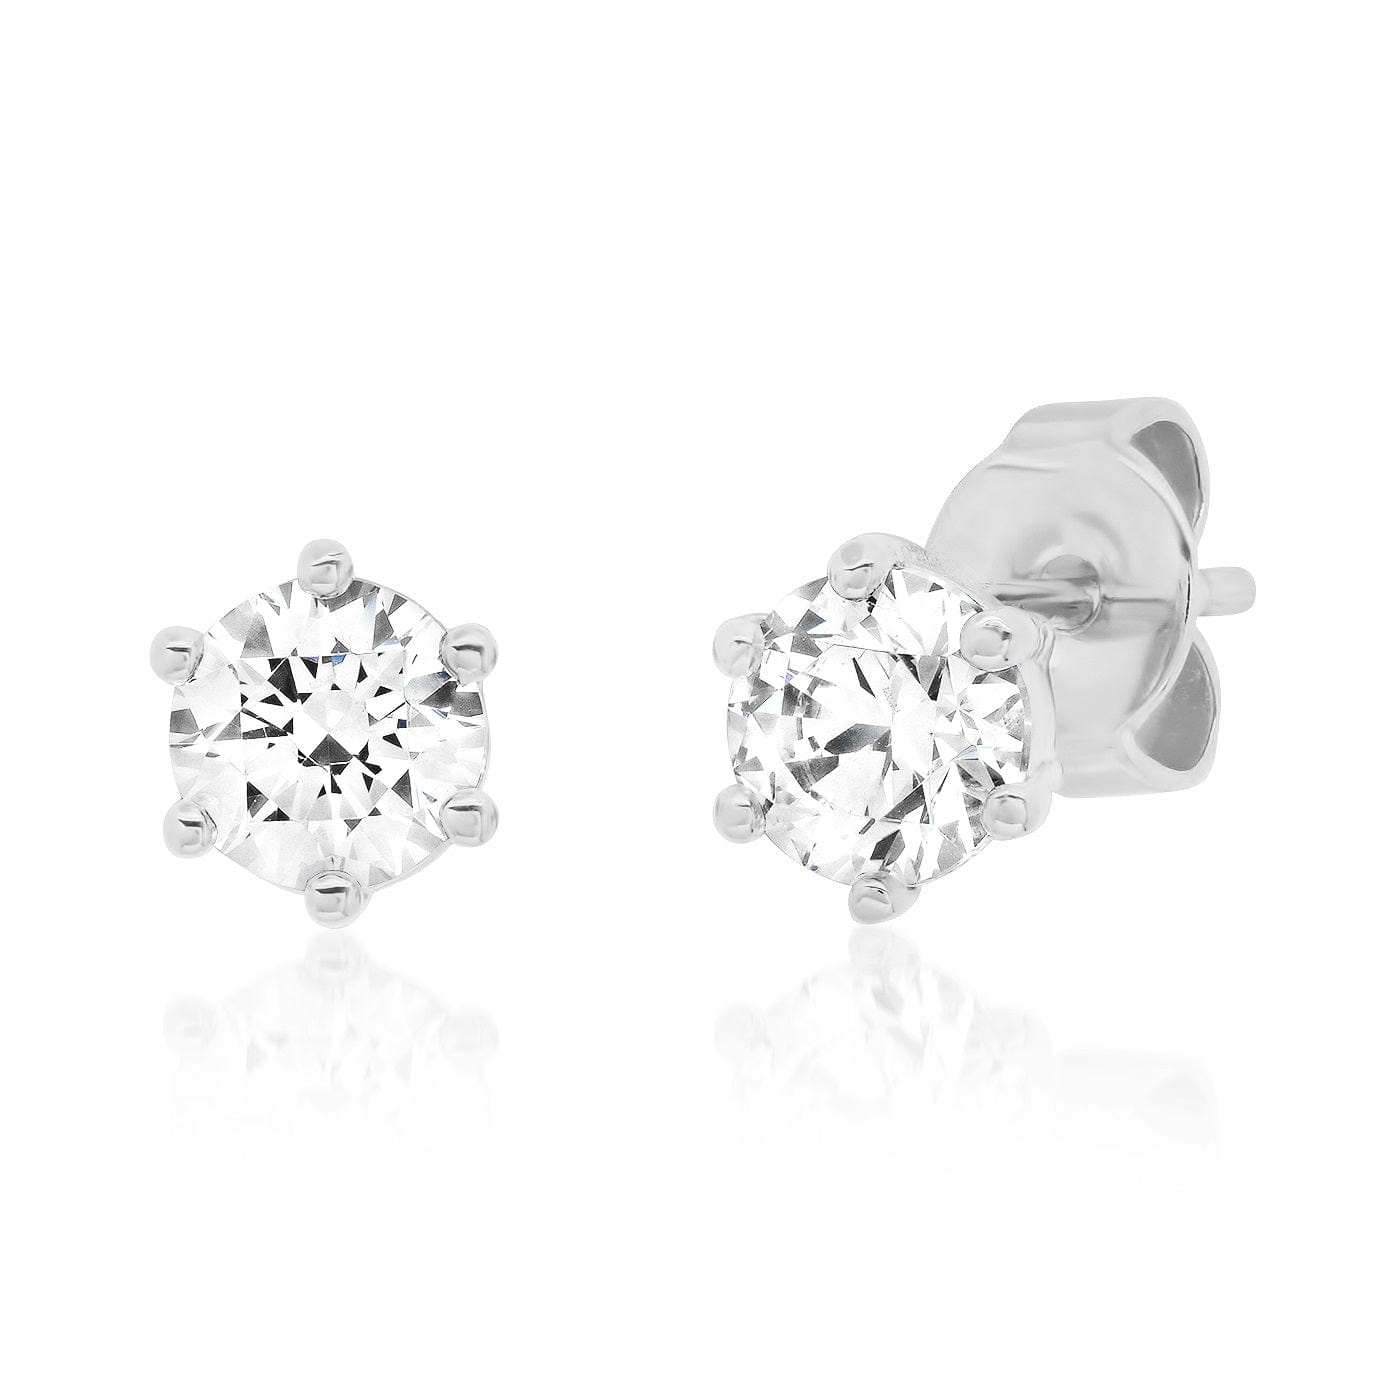 TAI JEWELRY Earrings Sterling Silver Solitaire Cz Stud